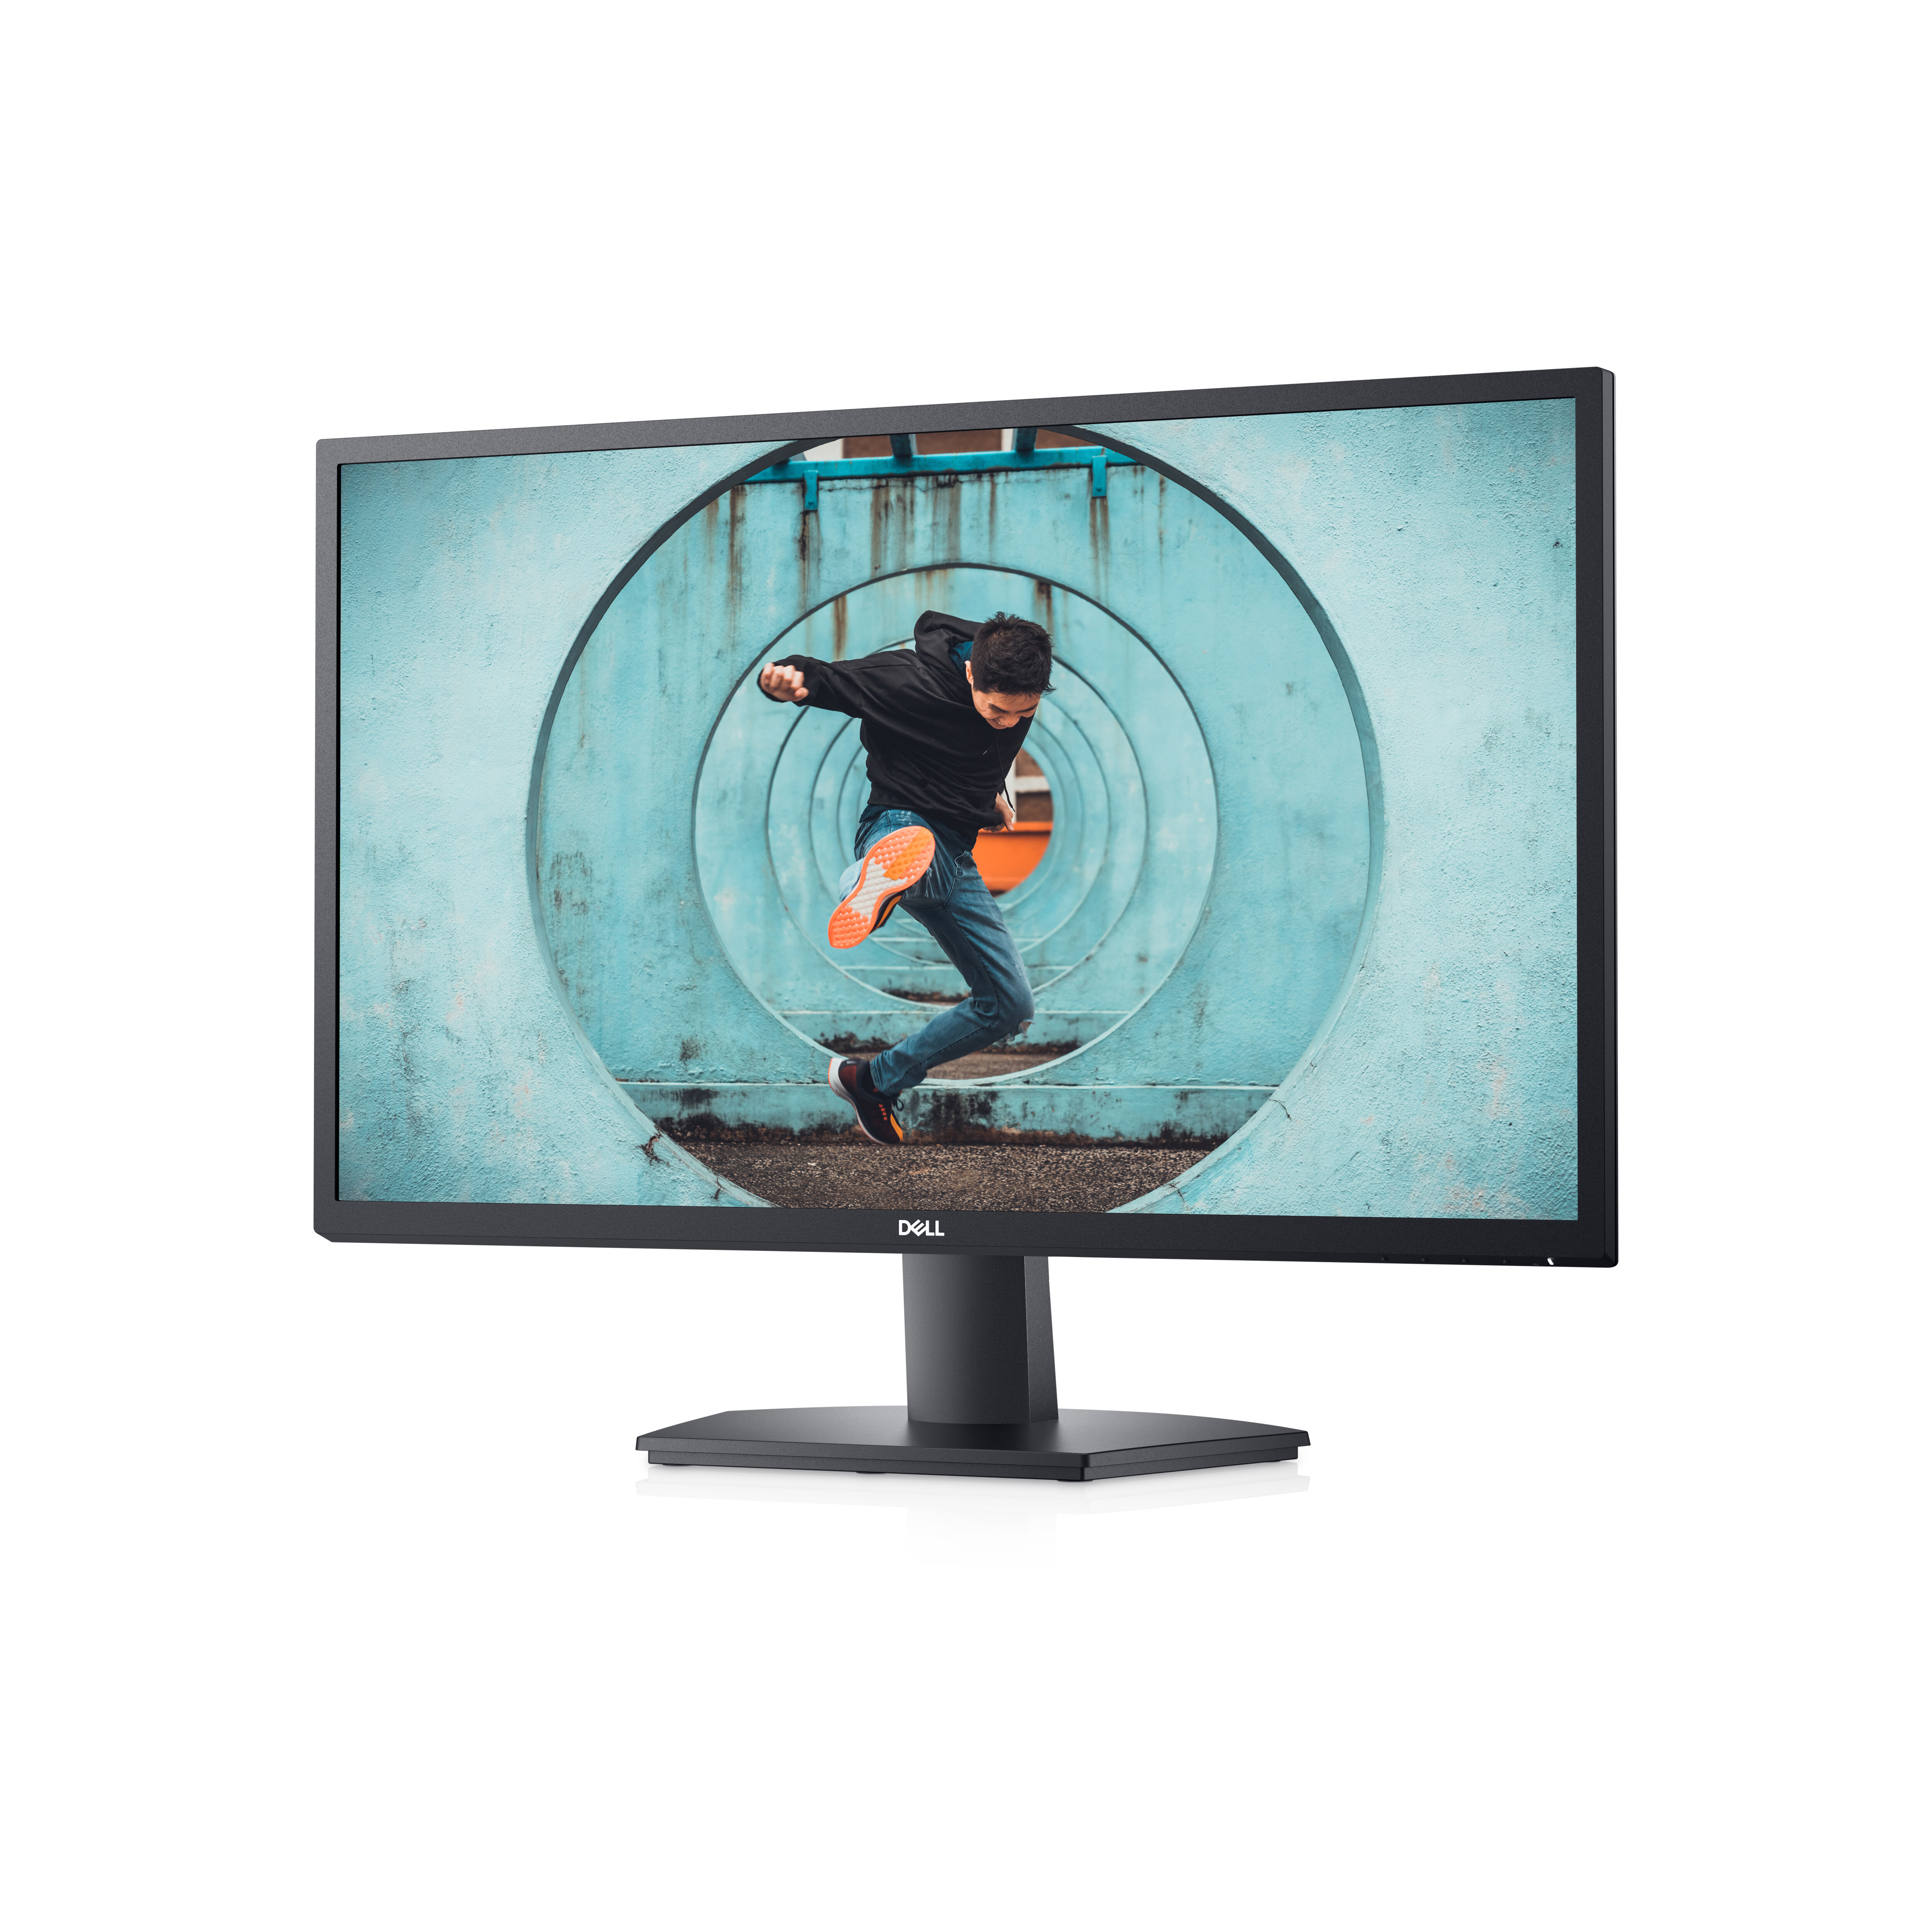 https://i.dell.com/is/image/DellContent//content/dam/ss2/product-images/dell-client-products/peripherals/monitors/s-series/se2722h/media-gallery/se2722h_cfp_00030lf090_bk.psd?fmt=pjpg&pscan=auto&scl=1&wid=5000&hei=5000&qlt=100,1&resMode=sharp2&size=5000,5000&chrss=full&imwidth=5000